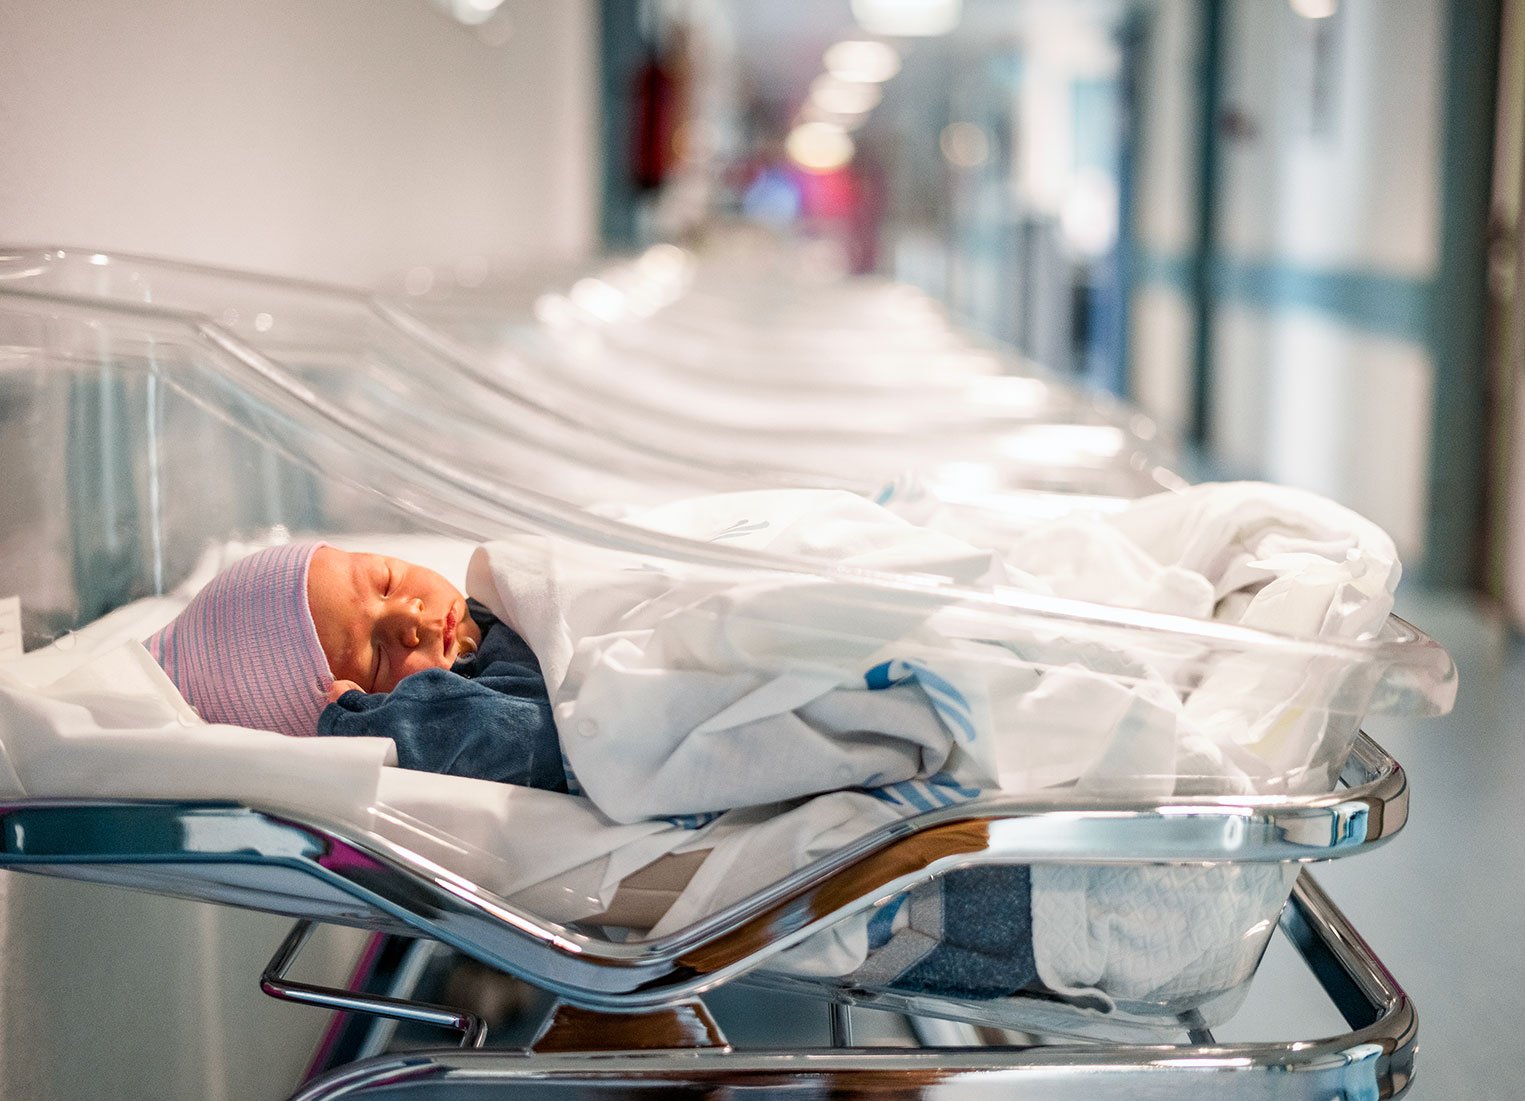 Infant security system for hospitals